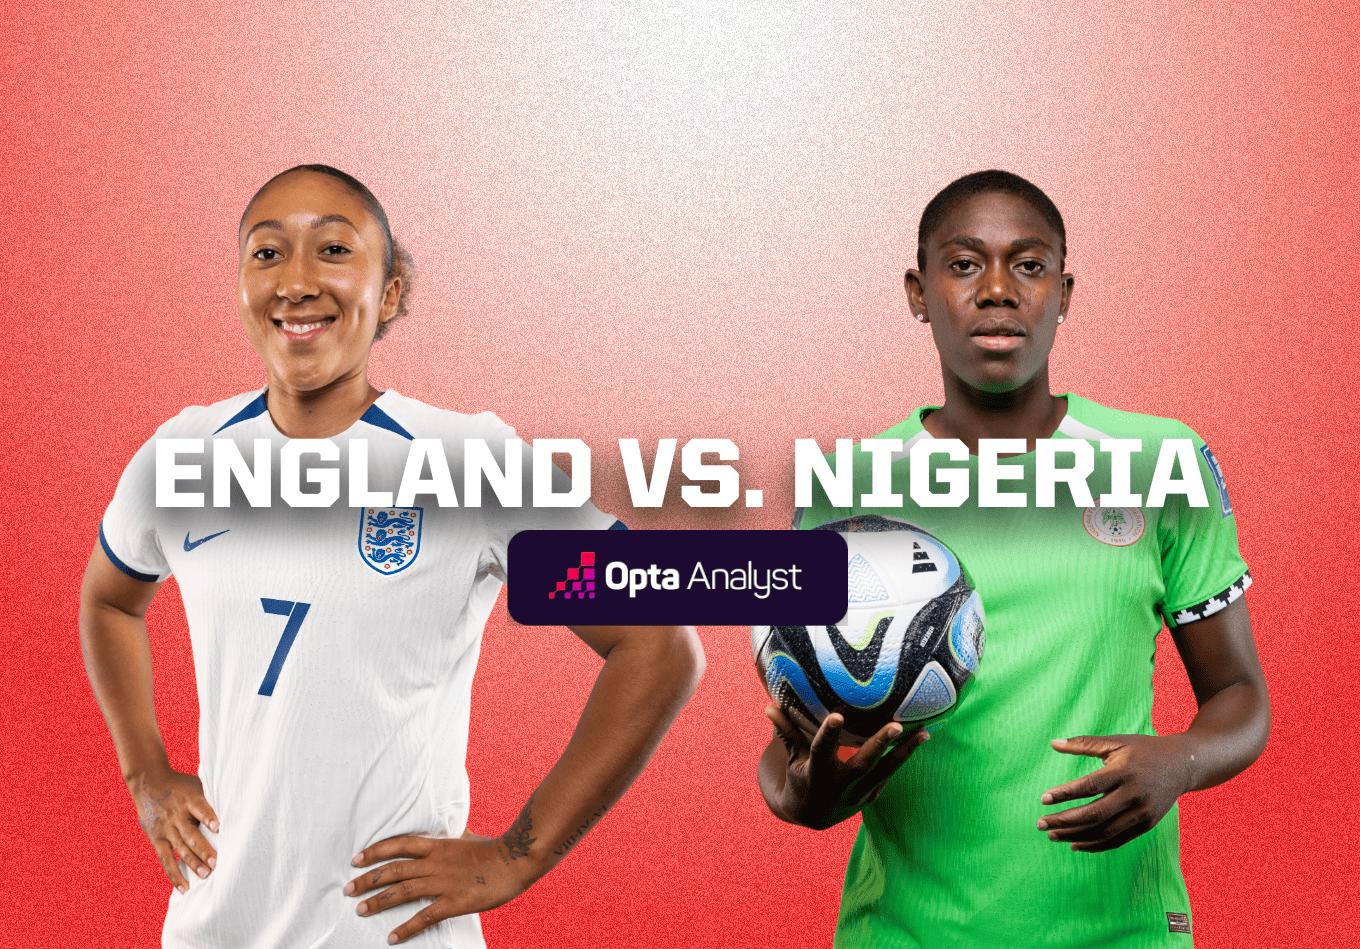 England vs Nigeria: 2023 Women’s World Cup Match Preview and Prediction